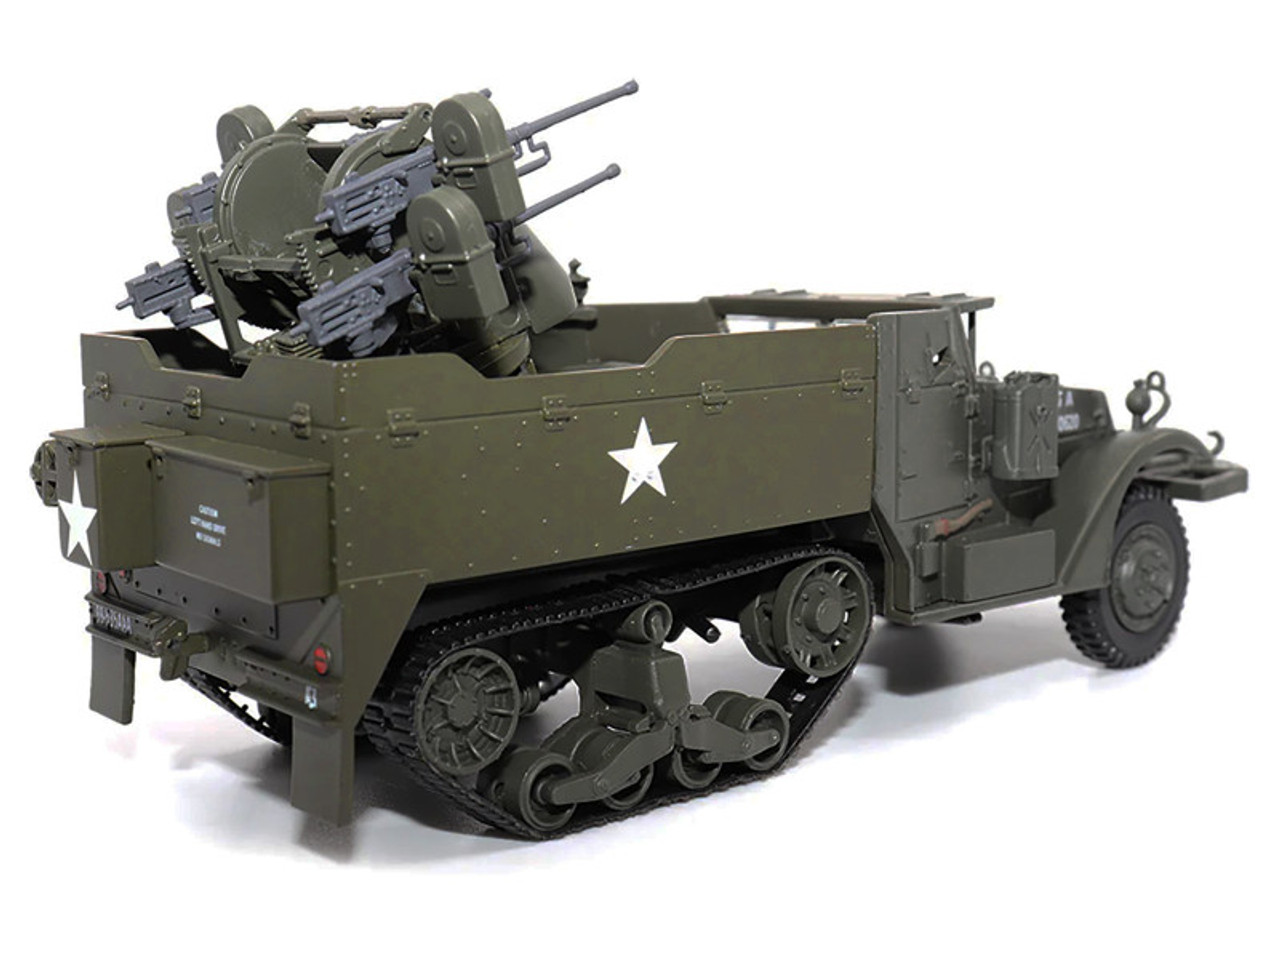 White M16 Multiple Gun Motor Carriage Olive Drab "United States Army" 1/43 Diecast Model by Militaria Die Cast